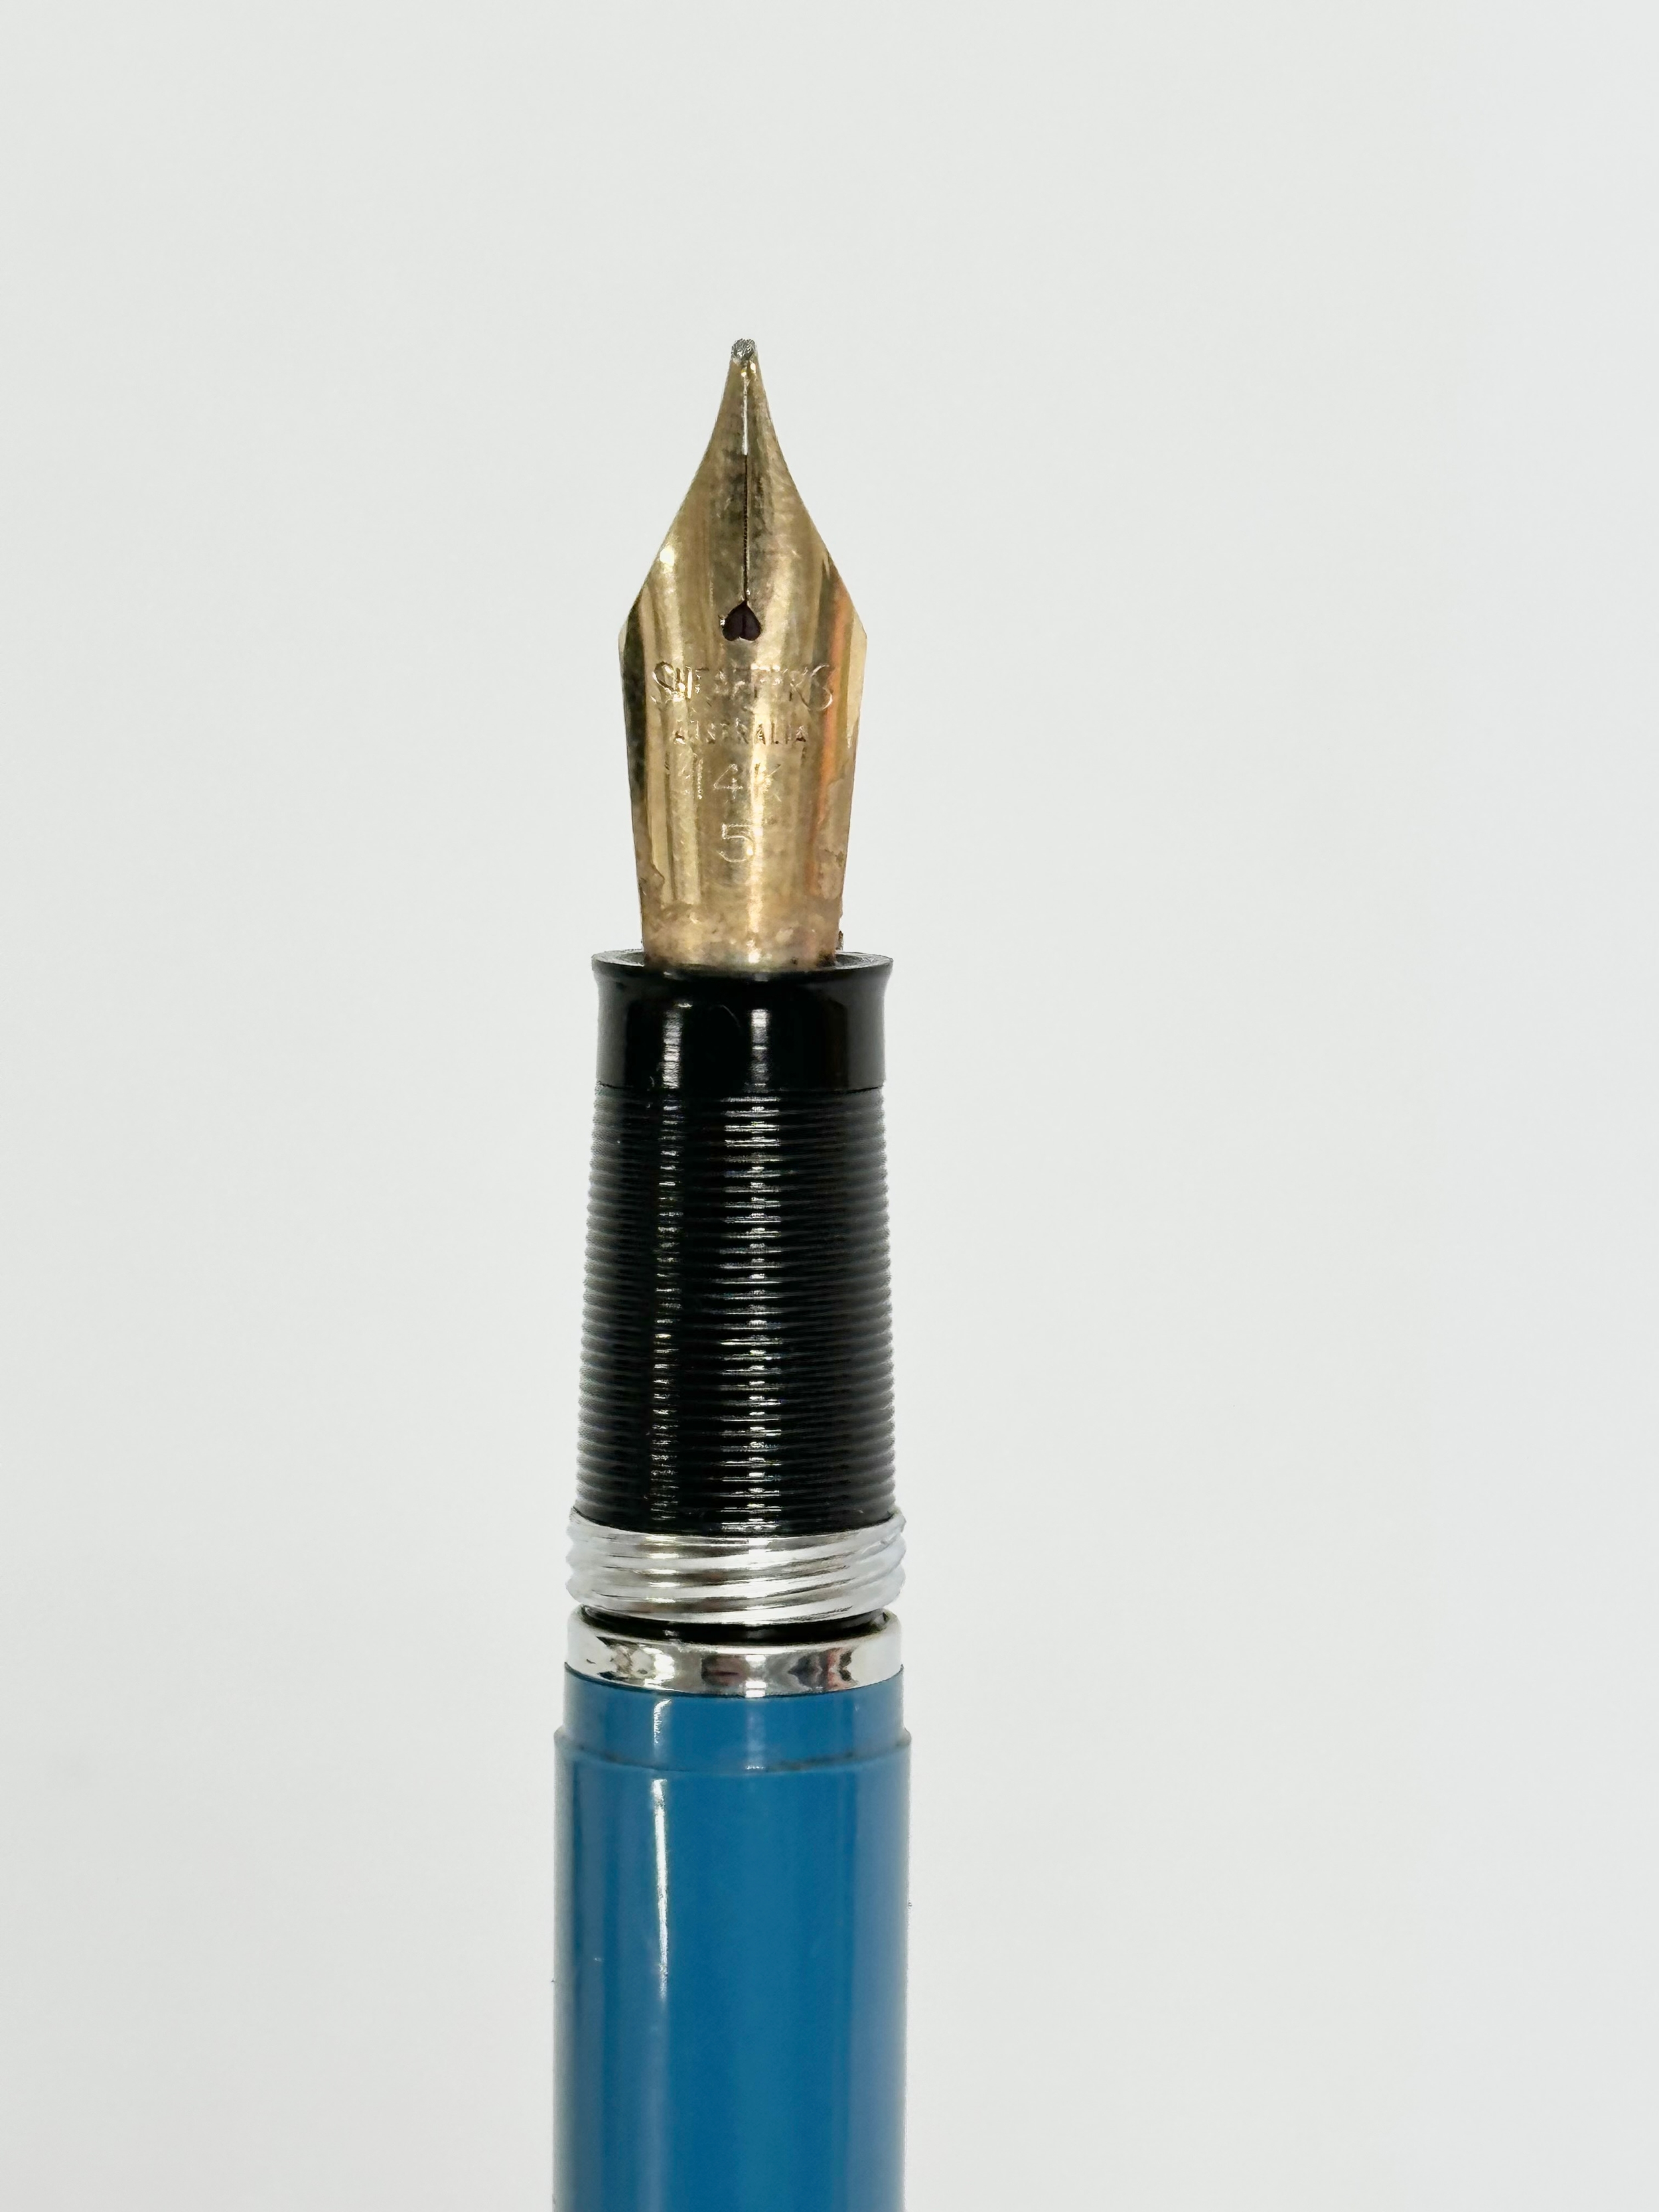 A 14k gold nip fountain pen by Sheaffer’s. - Image 3 of 3